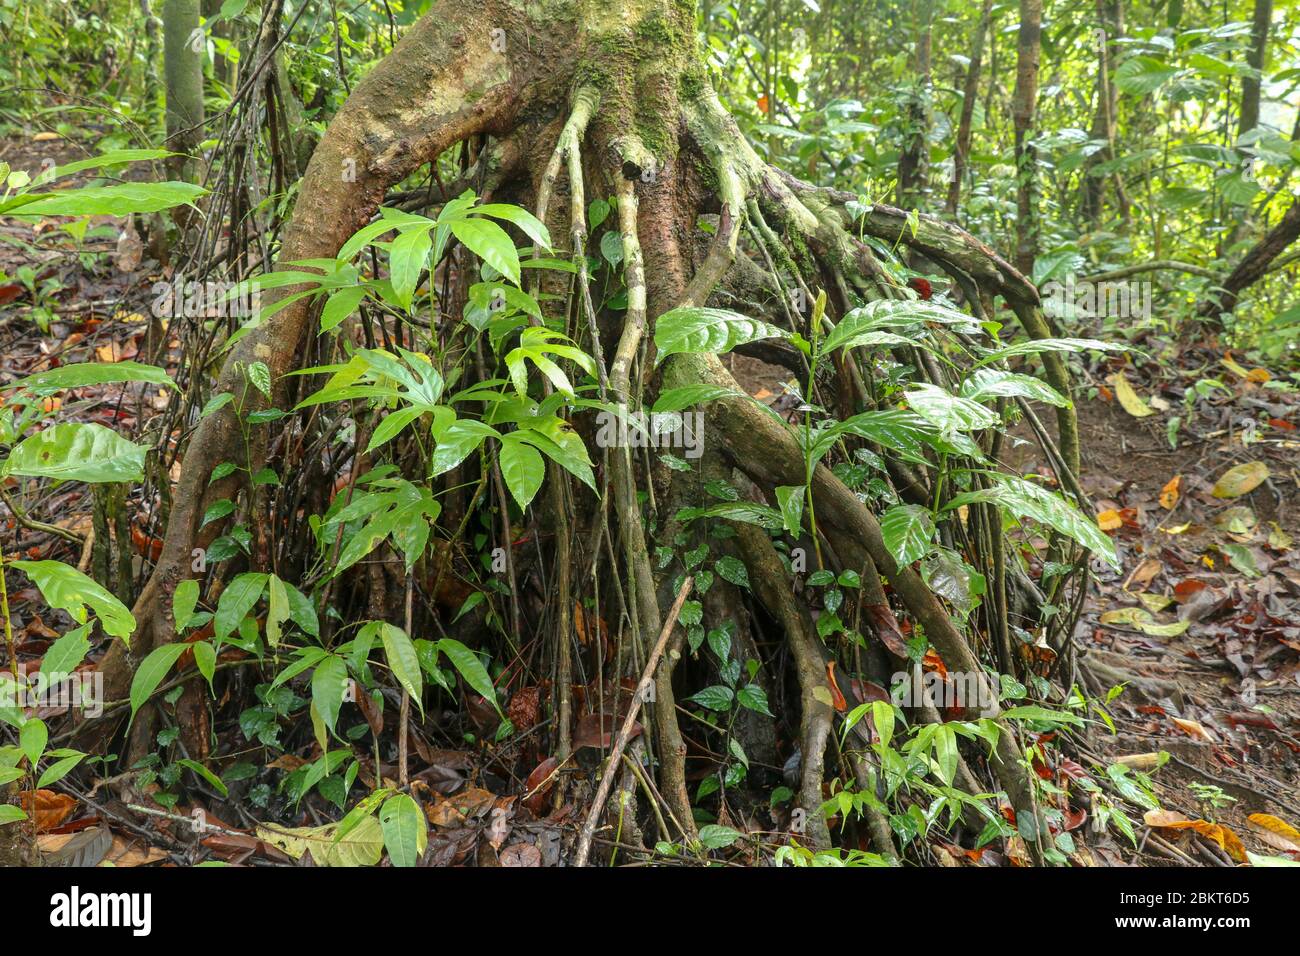 Branched root system of a tropical tree in the rainforest. Roots protruding above the surface of the soil. Tropical vegetation grows between the root Stock Photo